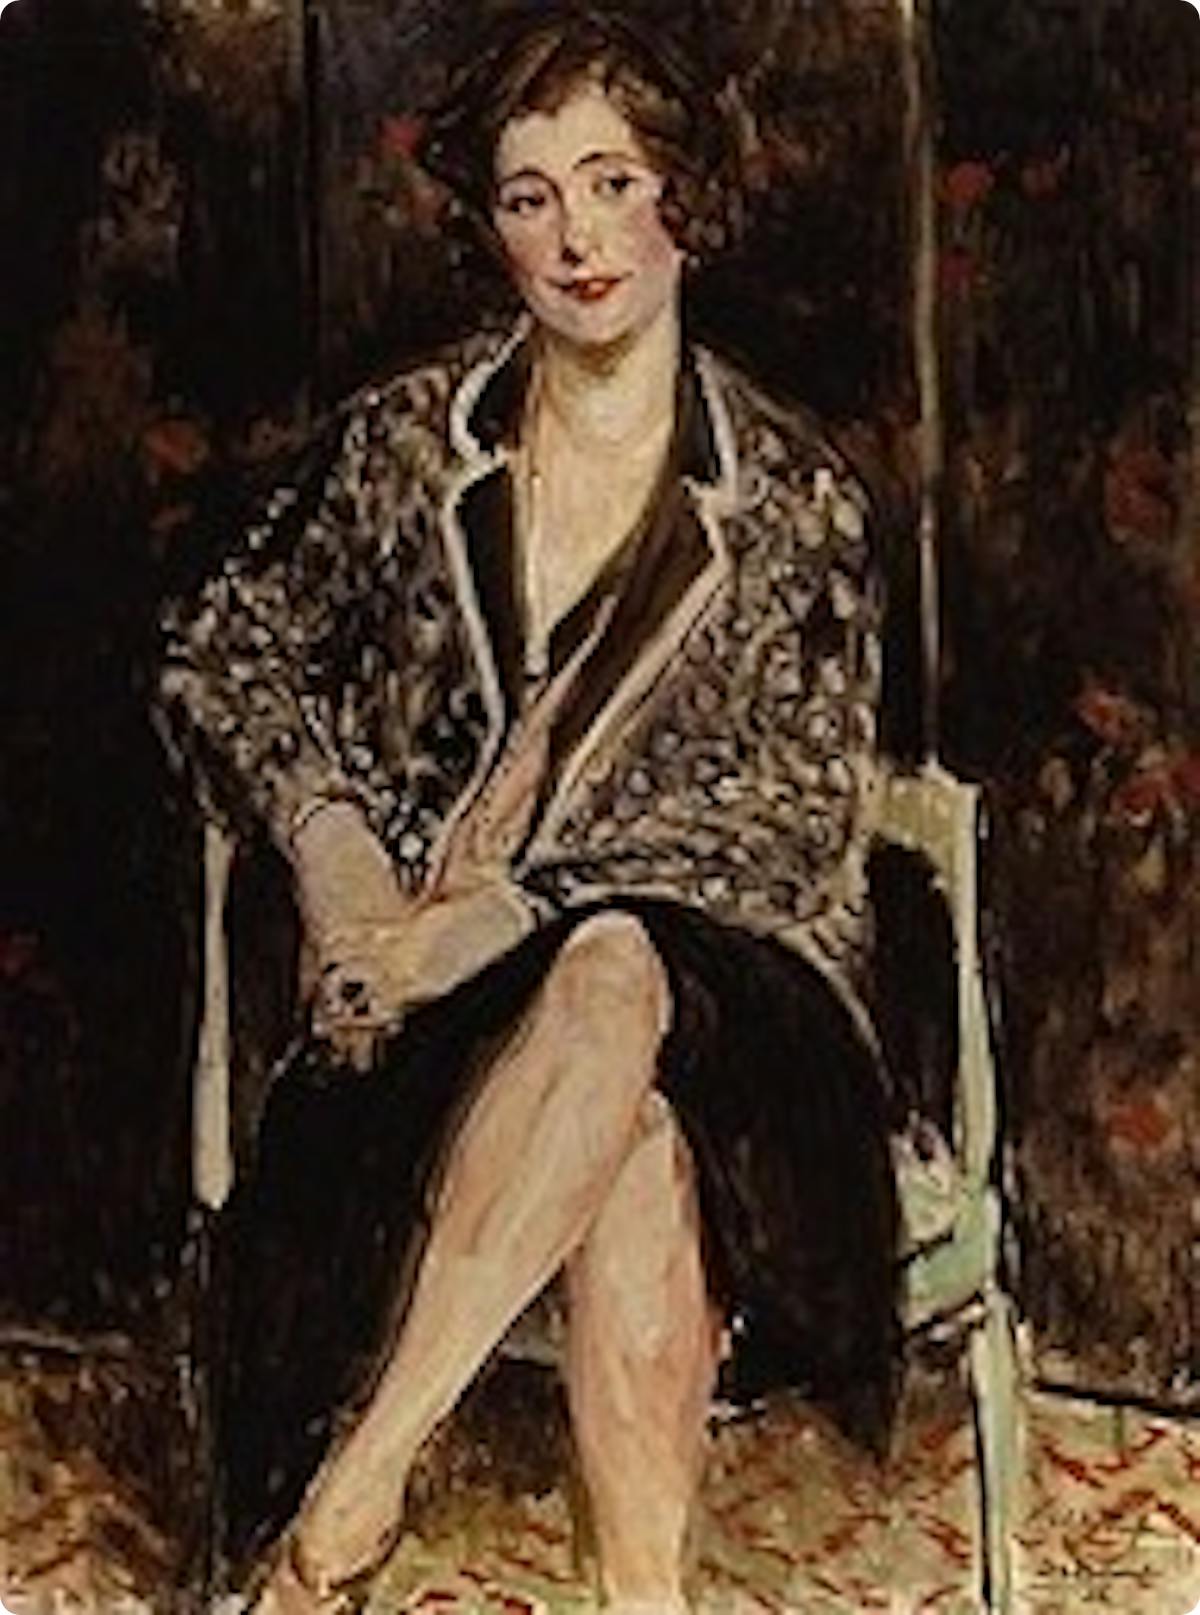 Painting of Violet by Jacques-Emile Blanche (1861-1942).